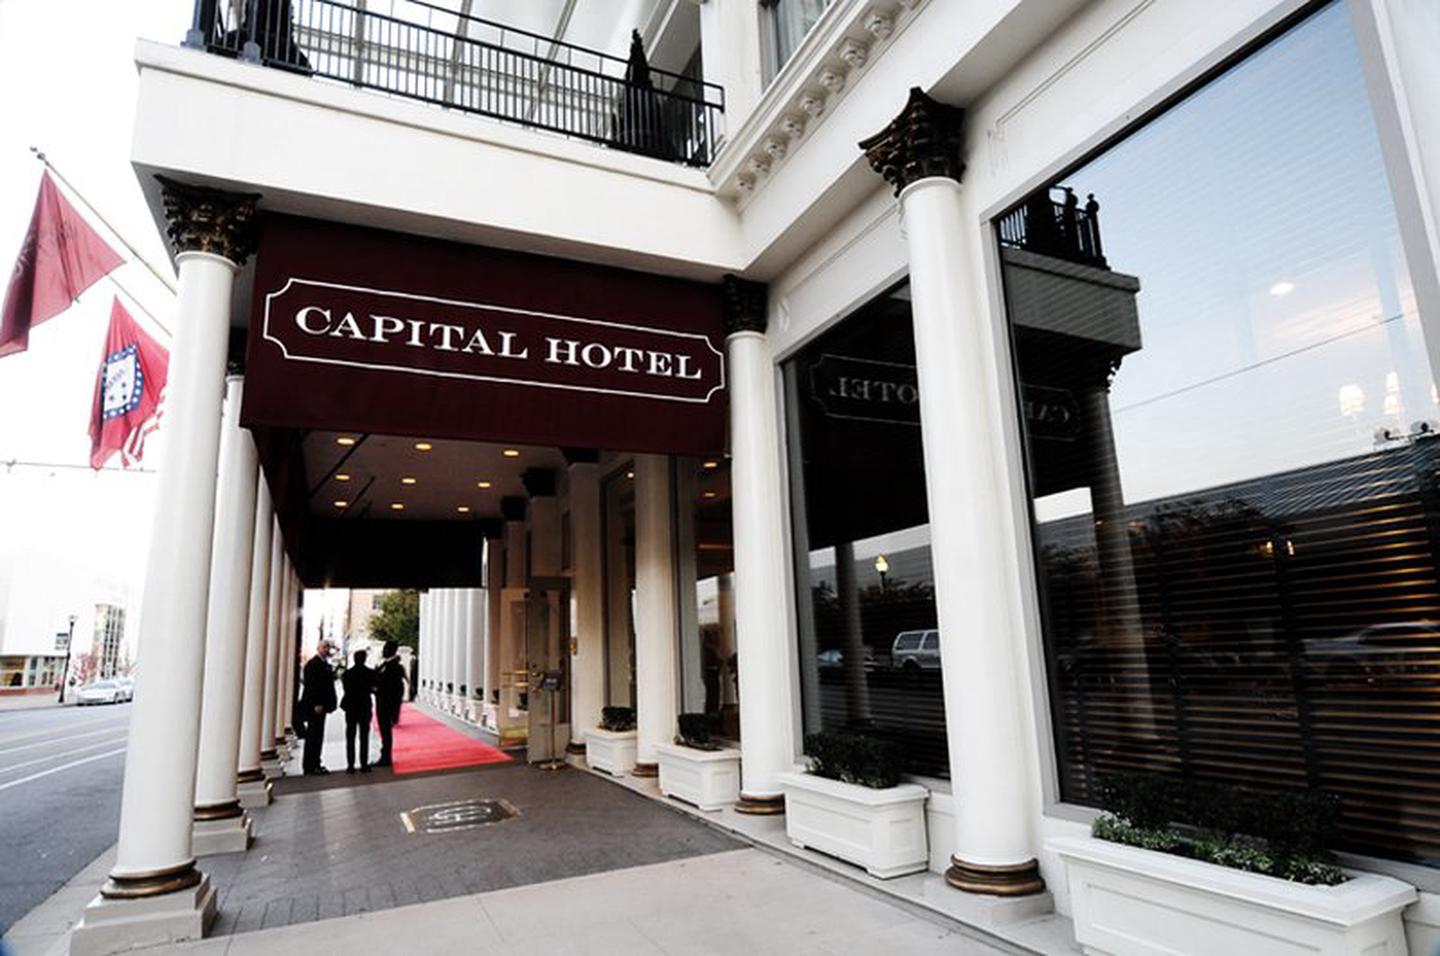 Capital HotelThe landmark hotel in Little Rock hosted many political and historic personages, including President Ulysses S. Grant. In fact, legend says that the Capital's unusually large elevator was built to allow Grant to take his horse to his hotel room.